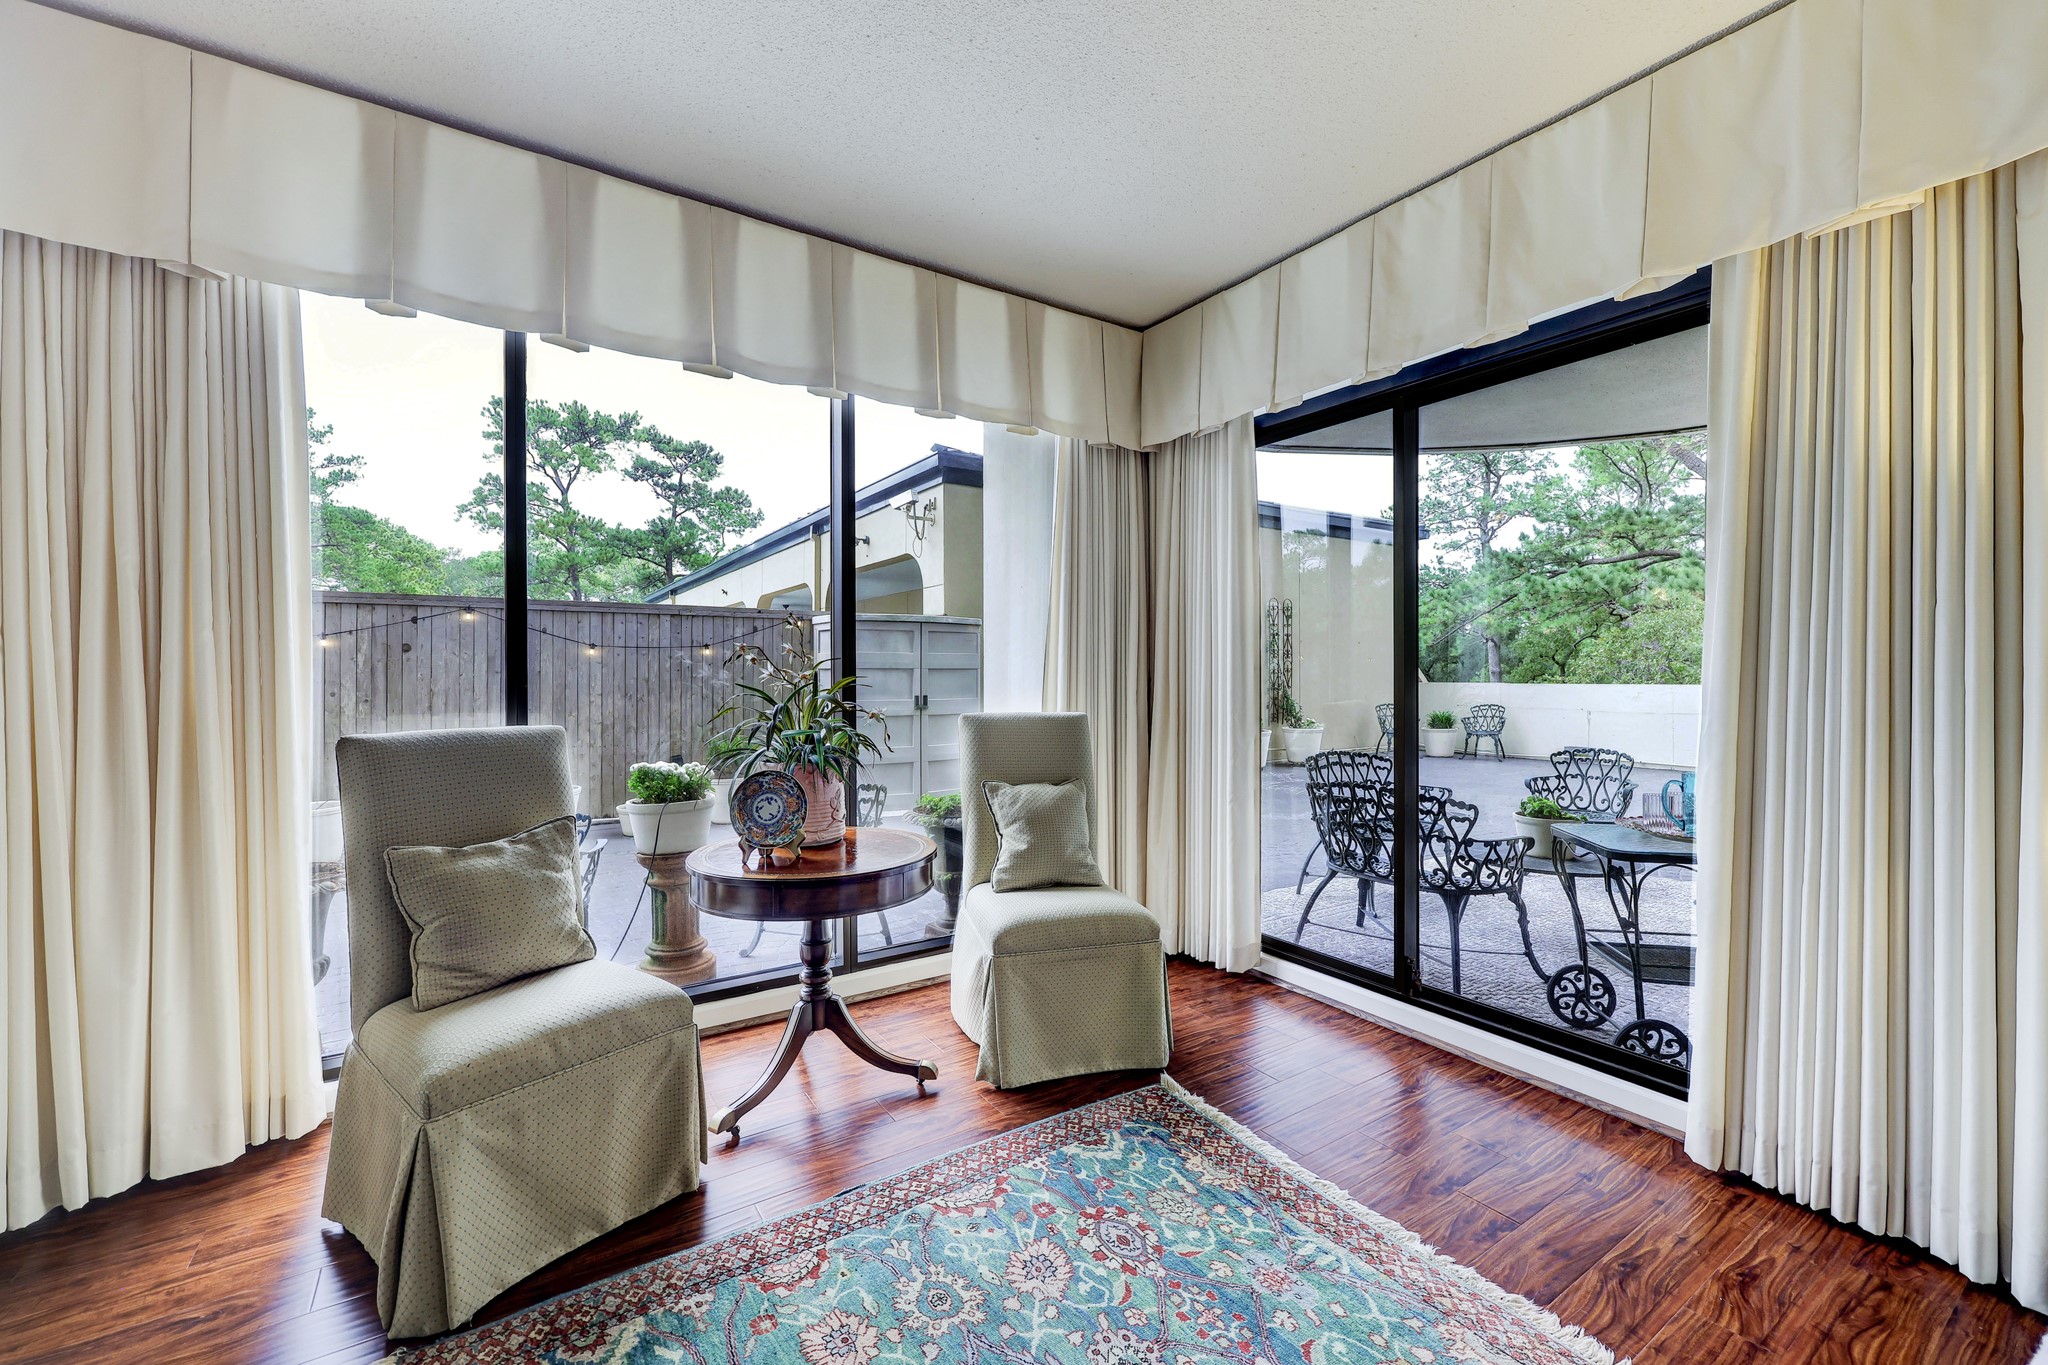 Seating area that brings the outdoor in with full-length sliding glass doors and windows